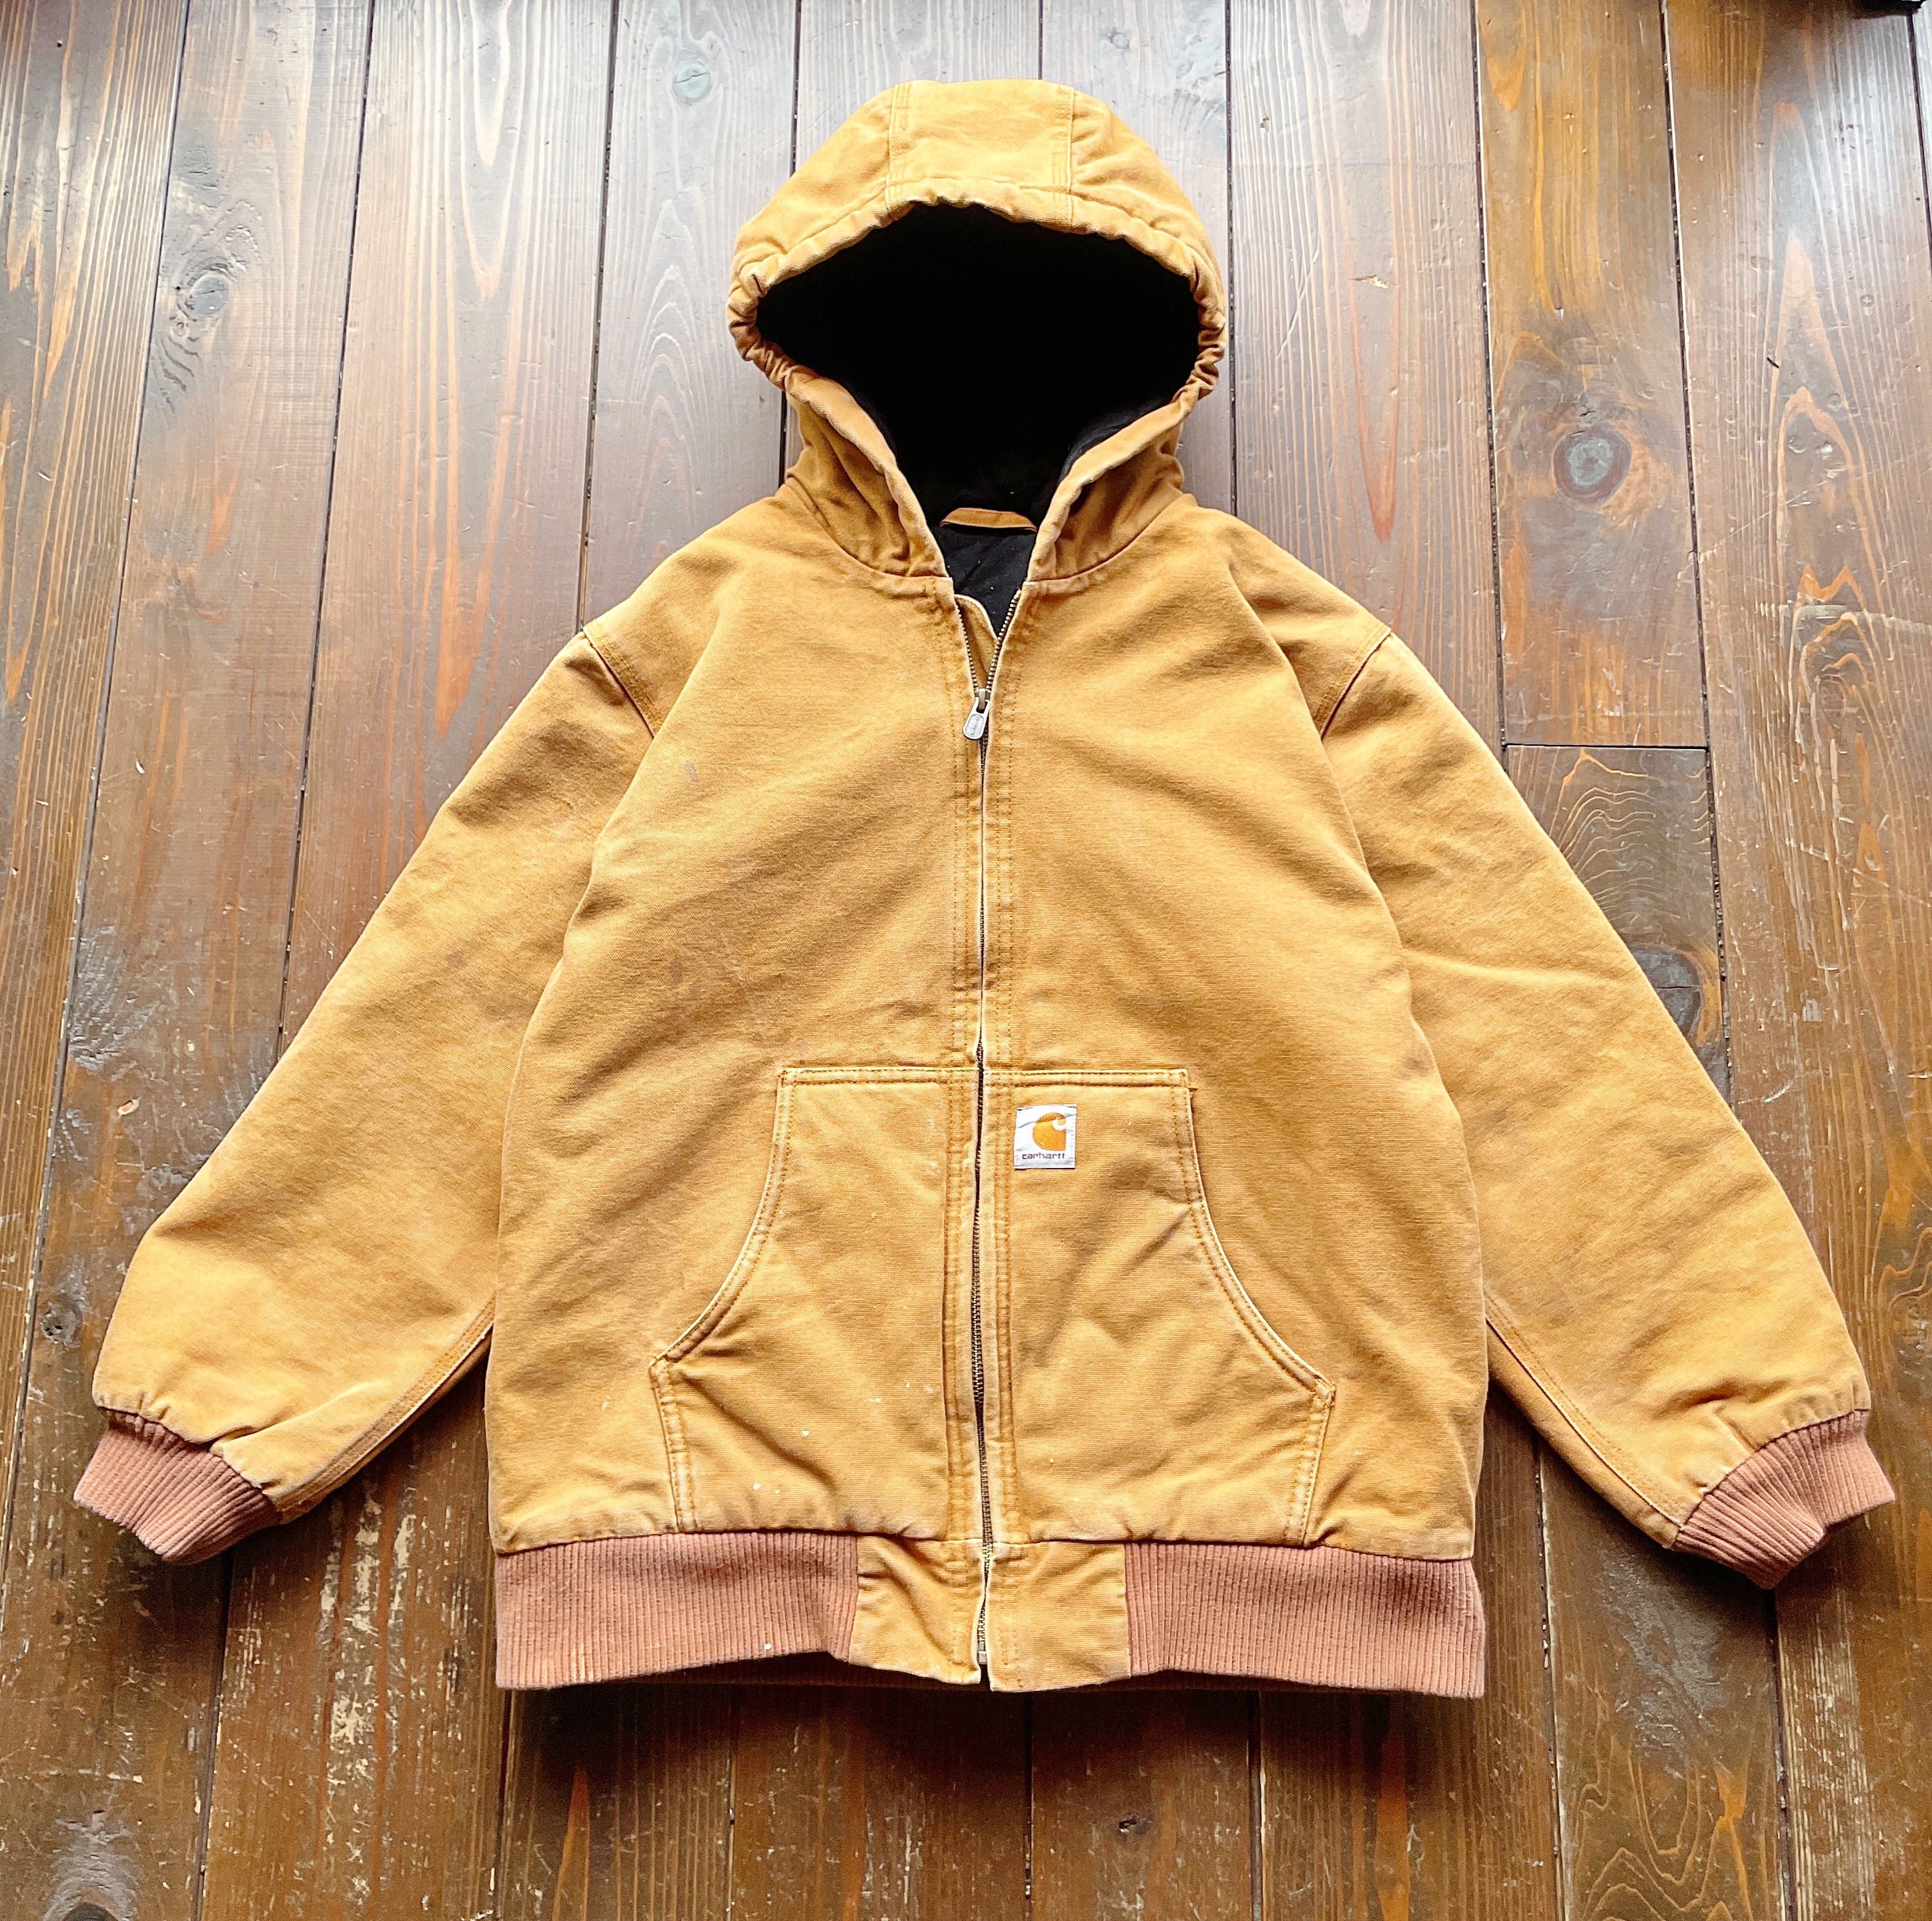 〈Ladies〉90s Carhartt ACTIVE JACKET ・Color Carhartt Brown・Size 表記無し ladies  S-M | Rassic powered by BASE